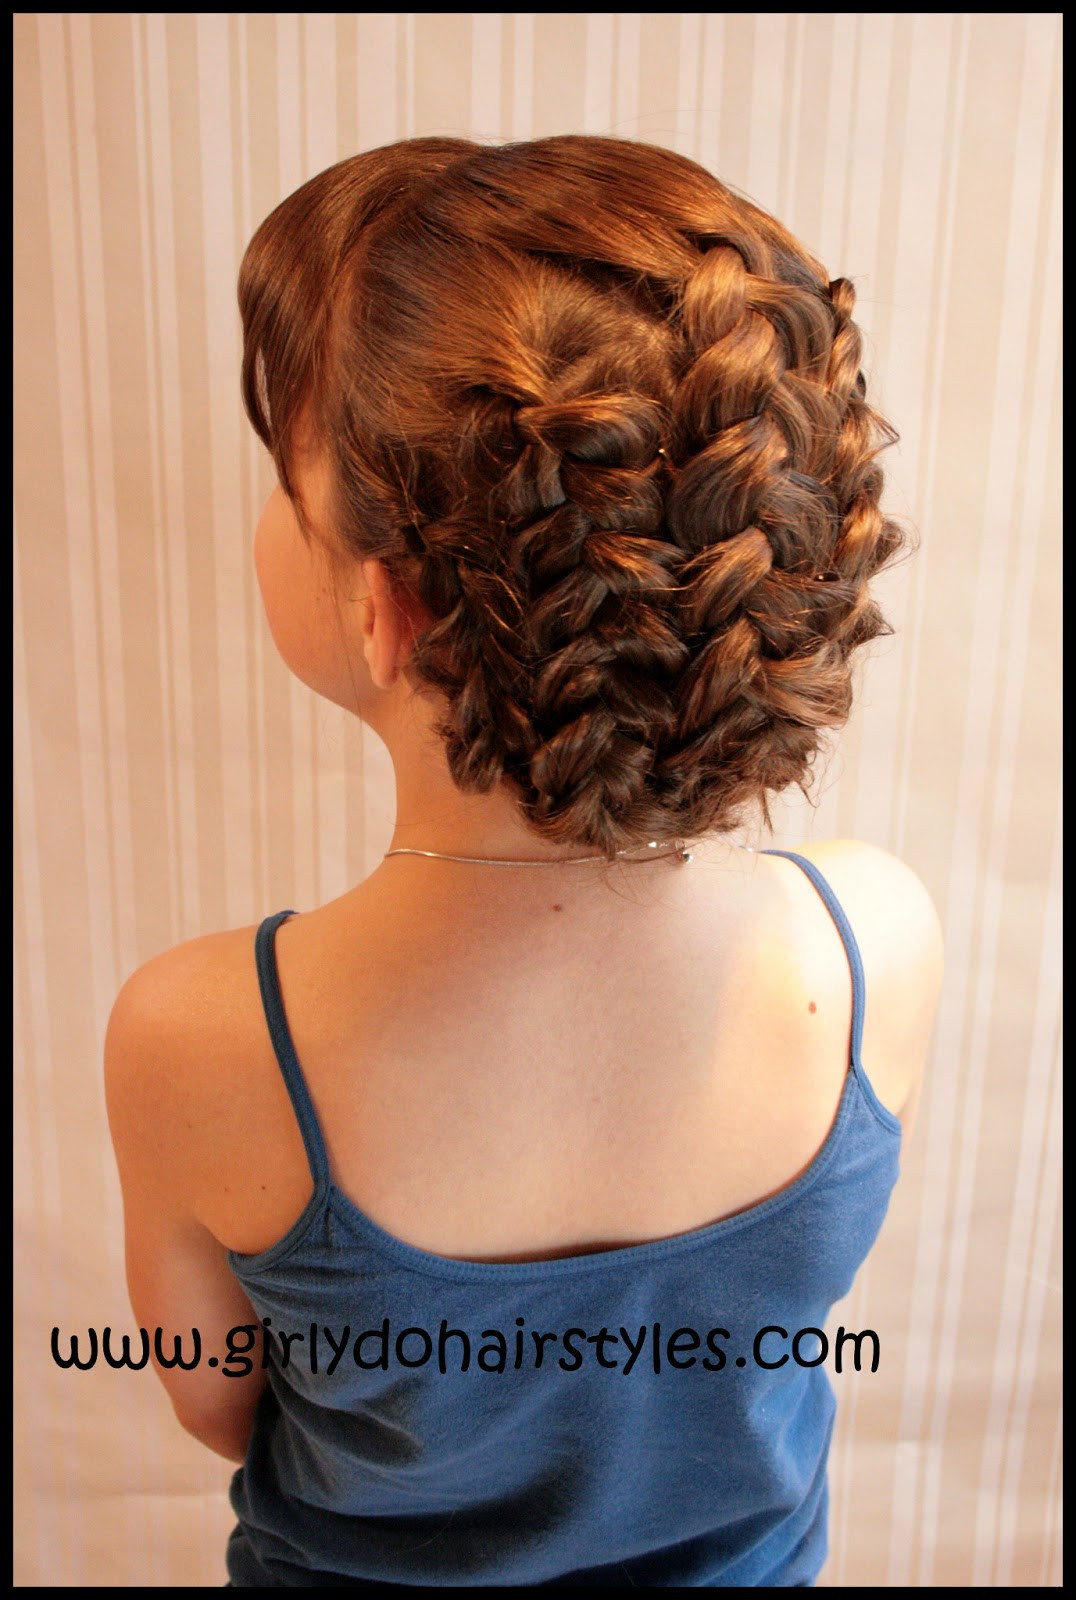 Girl Updo Hairstyles
 13 Spring Hairstyles